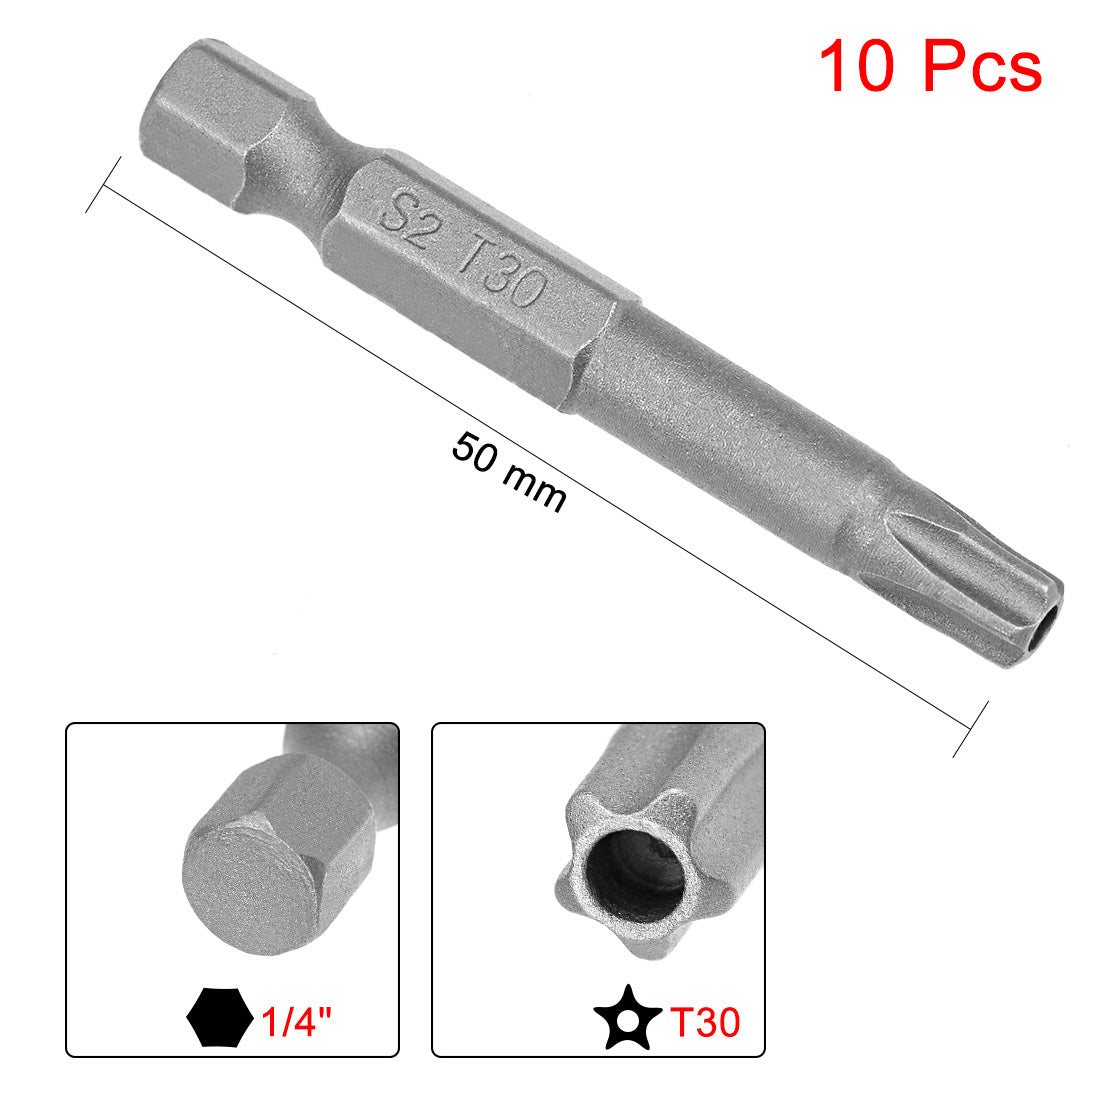 uxcell Uxcell 10 Pcs Magnetic T30 Star 5 Point Screwdriver Bits, 1/4 Inch Hex Shank 2-inch Length S2 Security Screw Driver Kit Tools